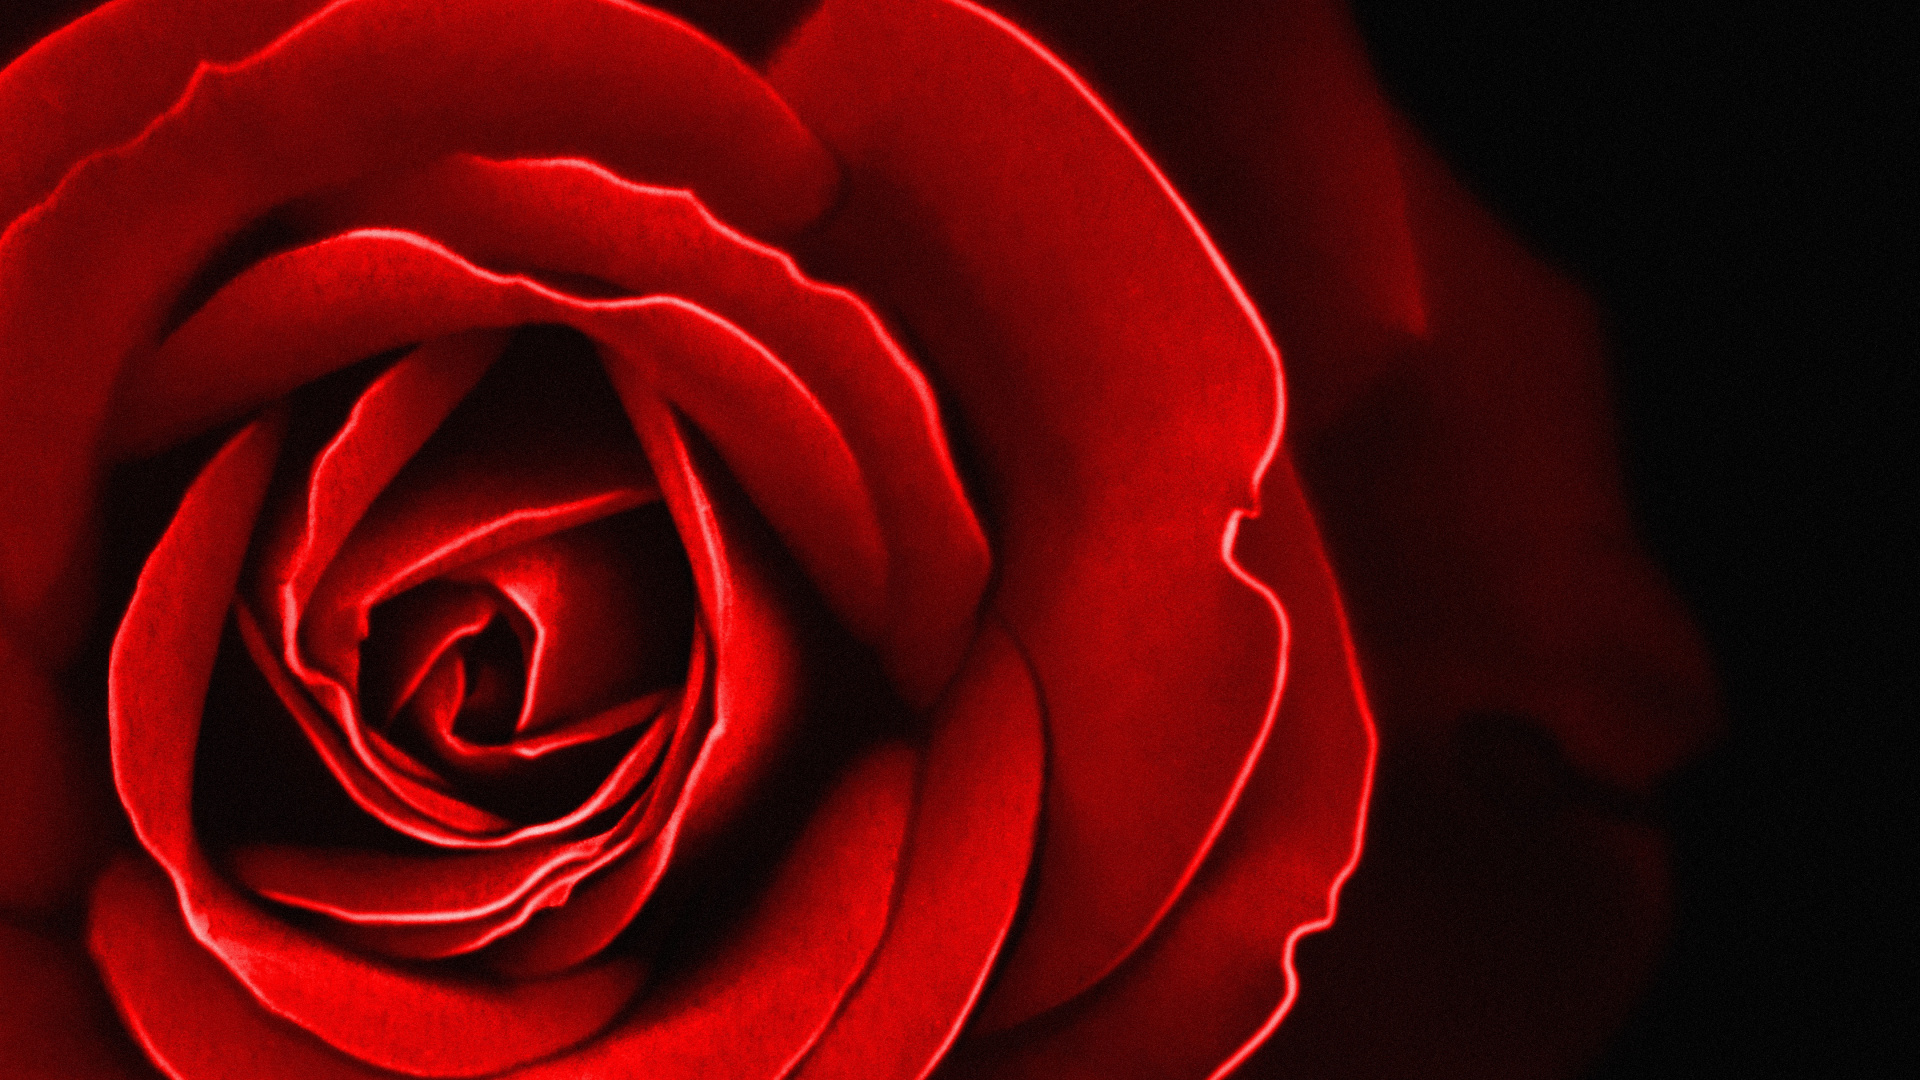 Rose Full HD, HDTV, 1080p 16:9 Wallpapers, HD Rose 1920x1080 Backgrounds,  Free Images Download